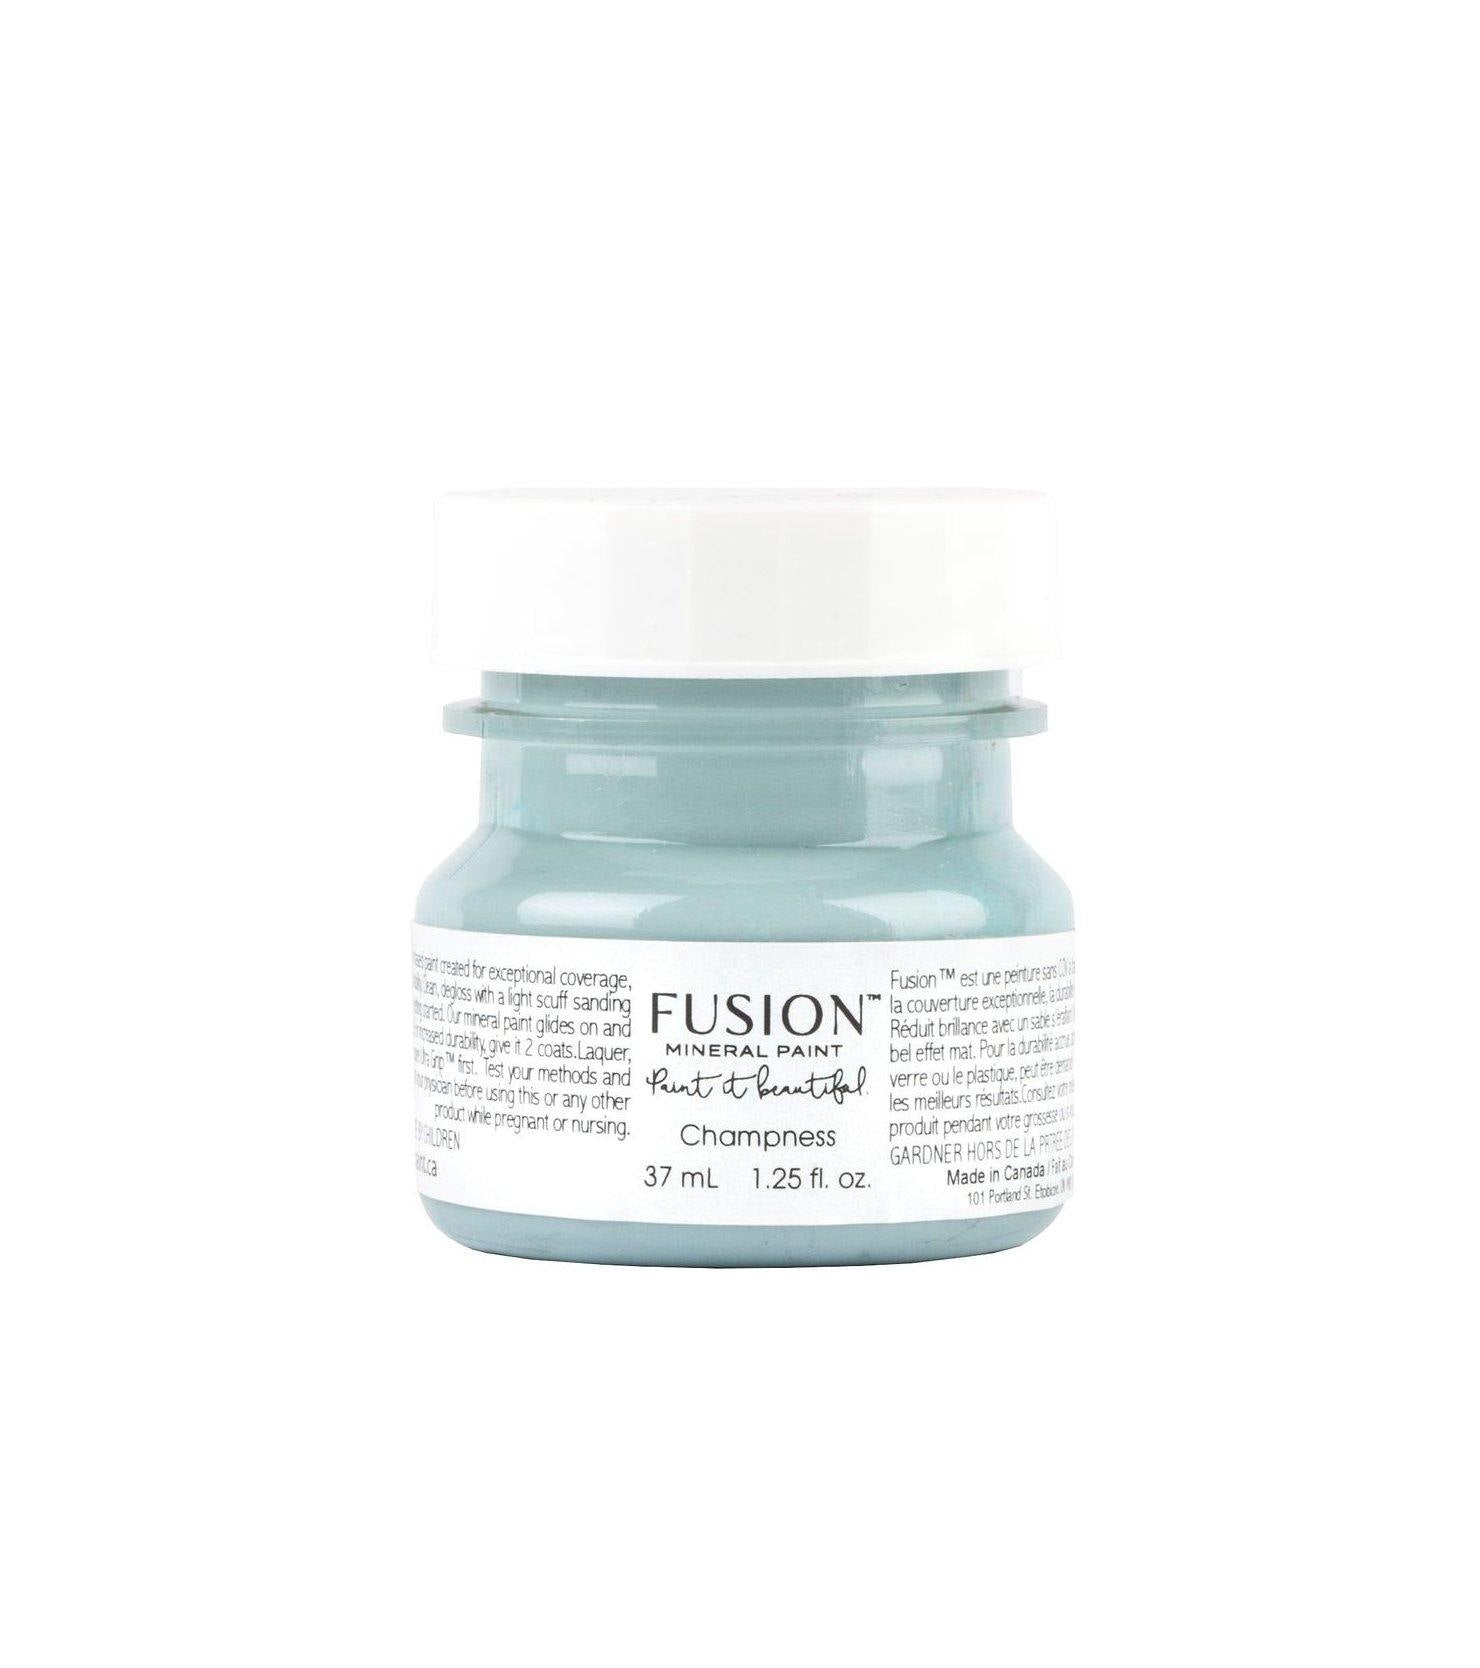 Fusion Mineral Paint Champness Tester